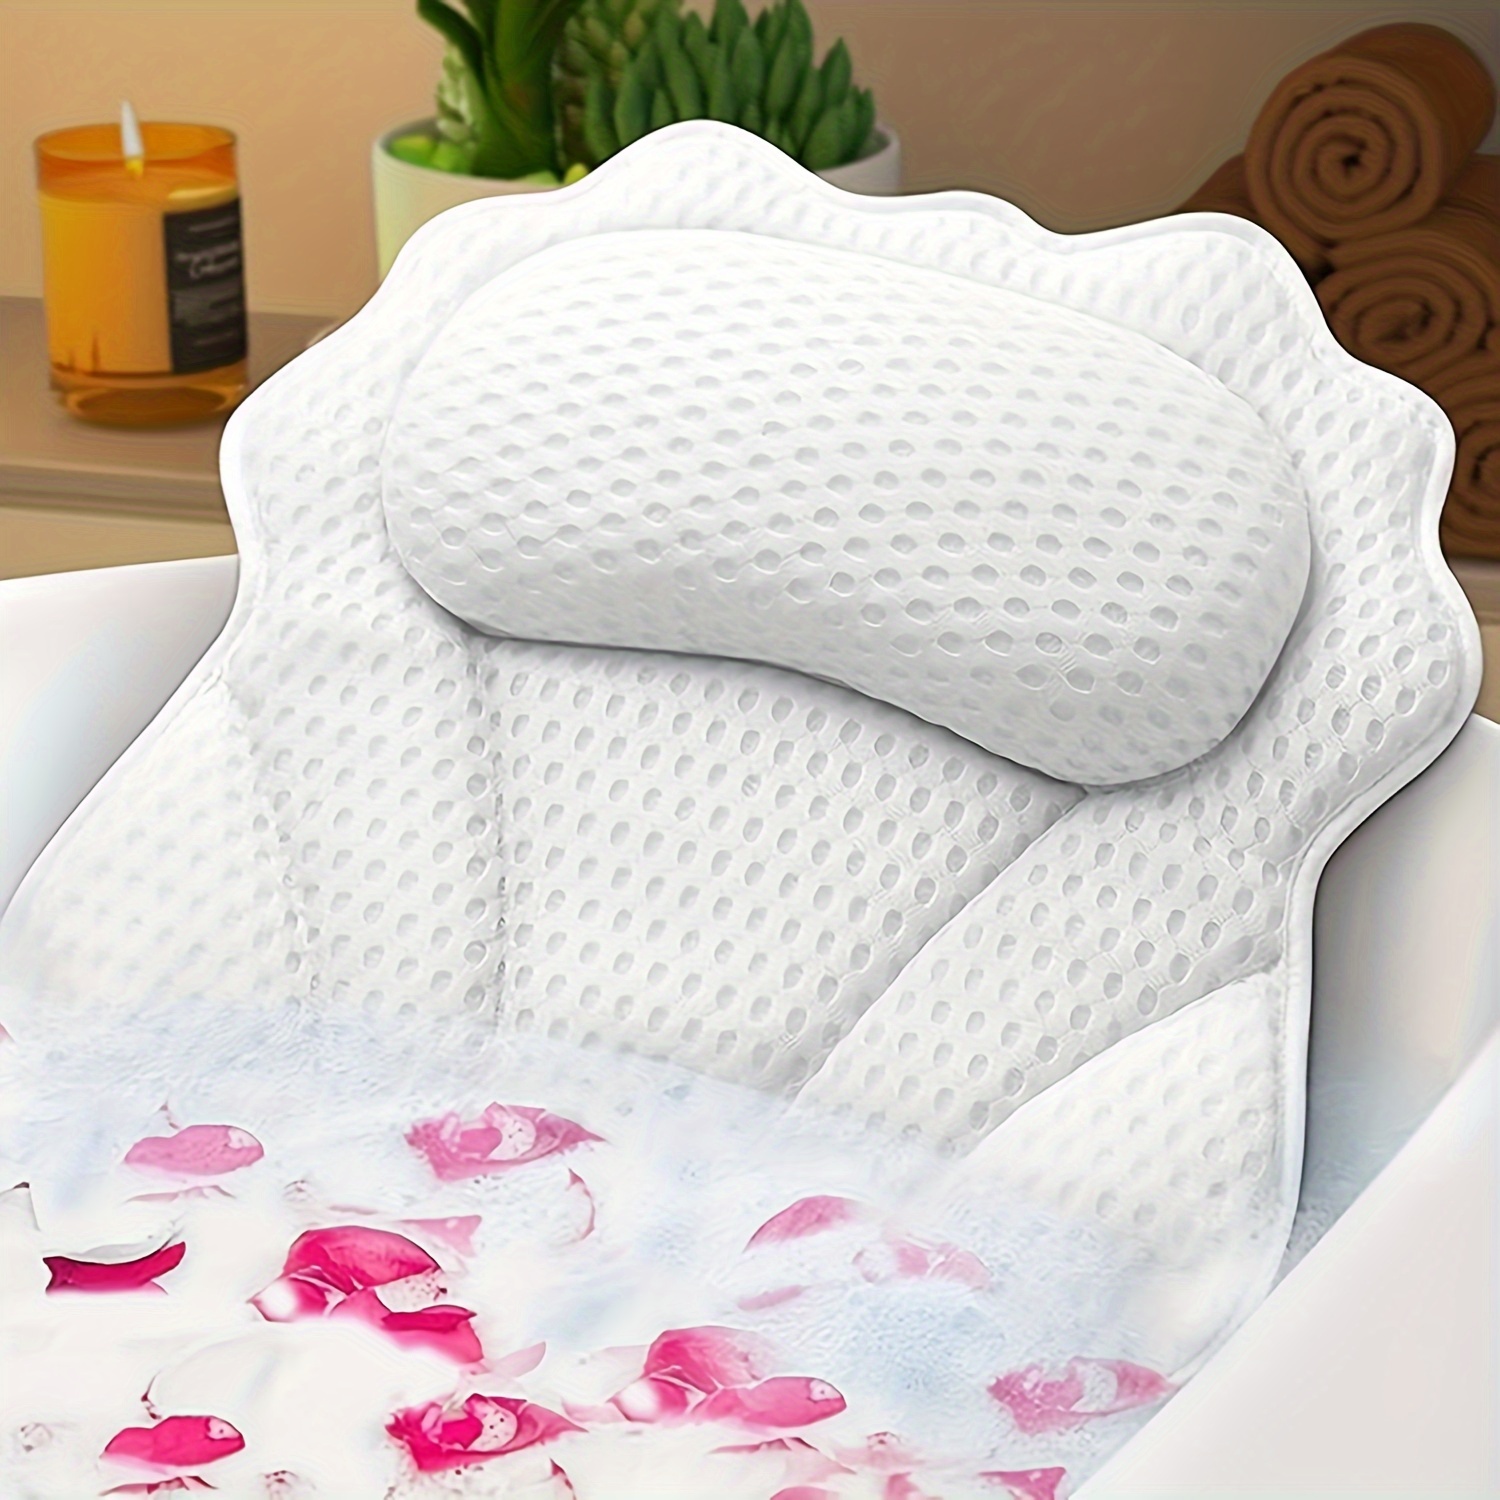 

Ergonomic Luxury Bath Pillow, With Head, Neck, Shoulder And Back Support, 4d Bath Pillow With 6 Strong Suction Cups, Suitable For All Bathtubs